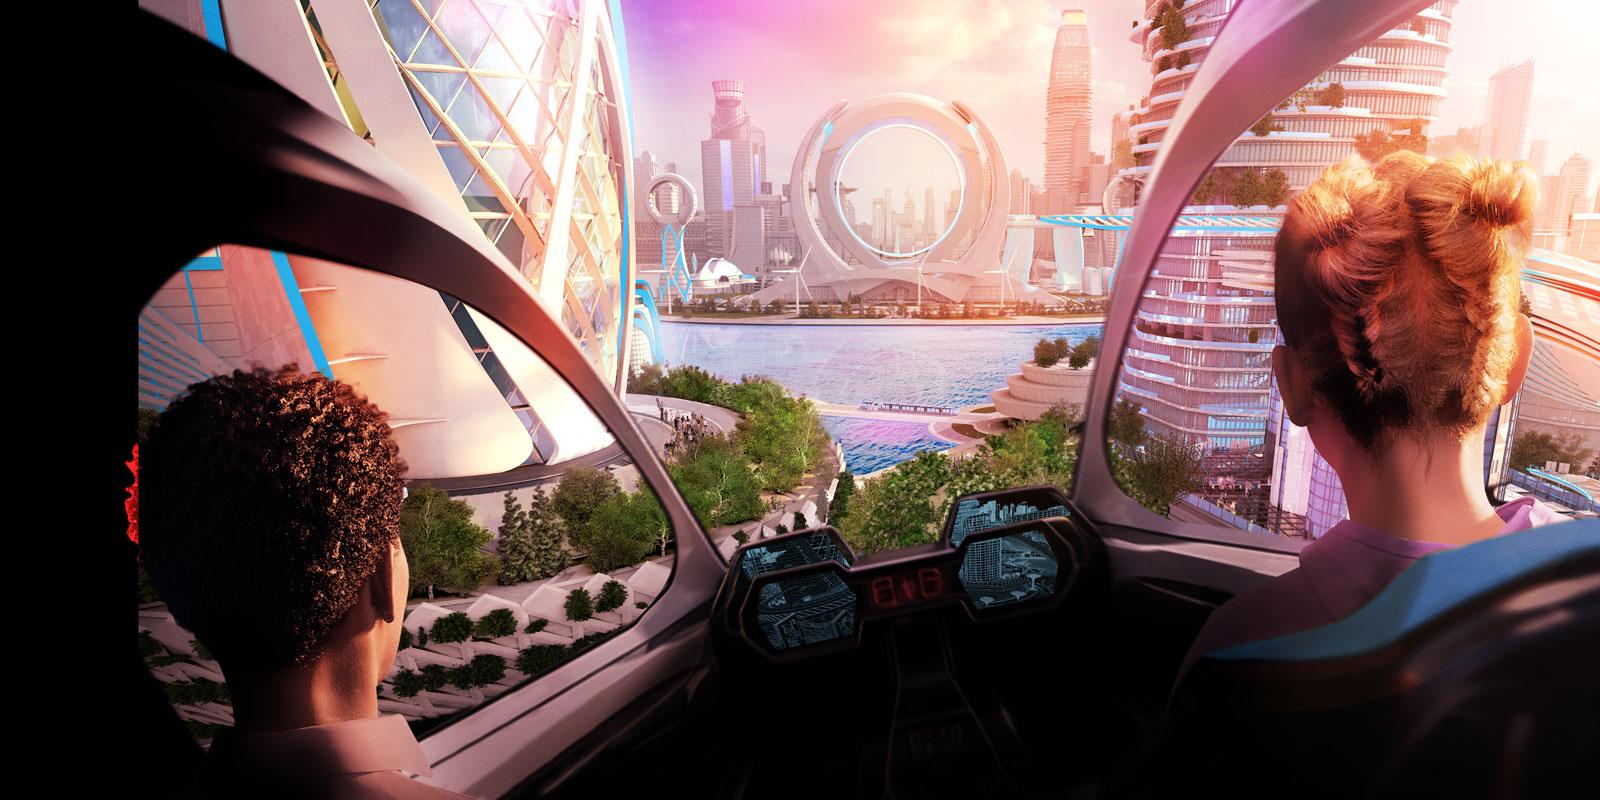 Cities of the Future. Image of a woman and a man overlooking a futuristic city through the window of a futuristic vehicle.